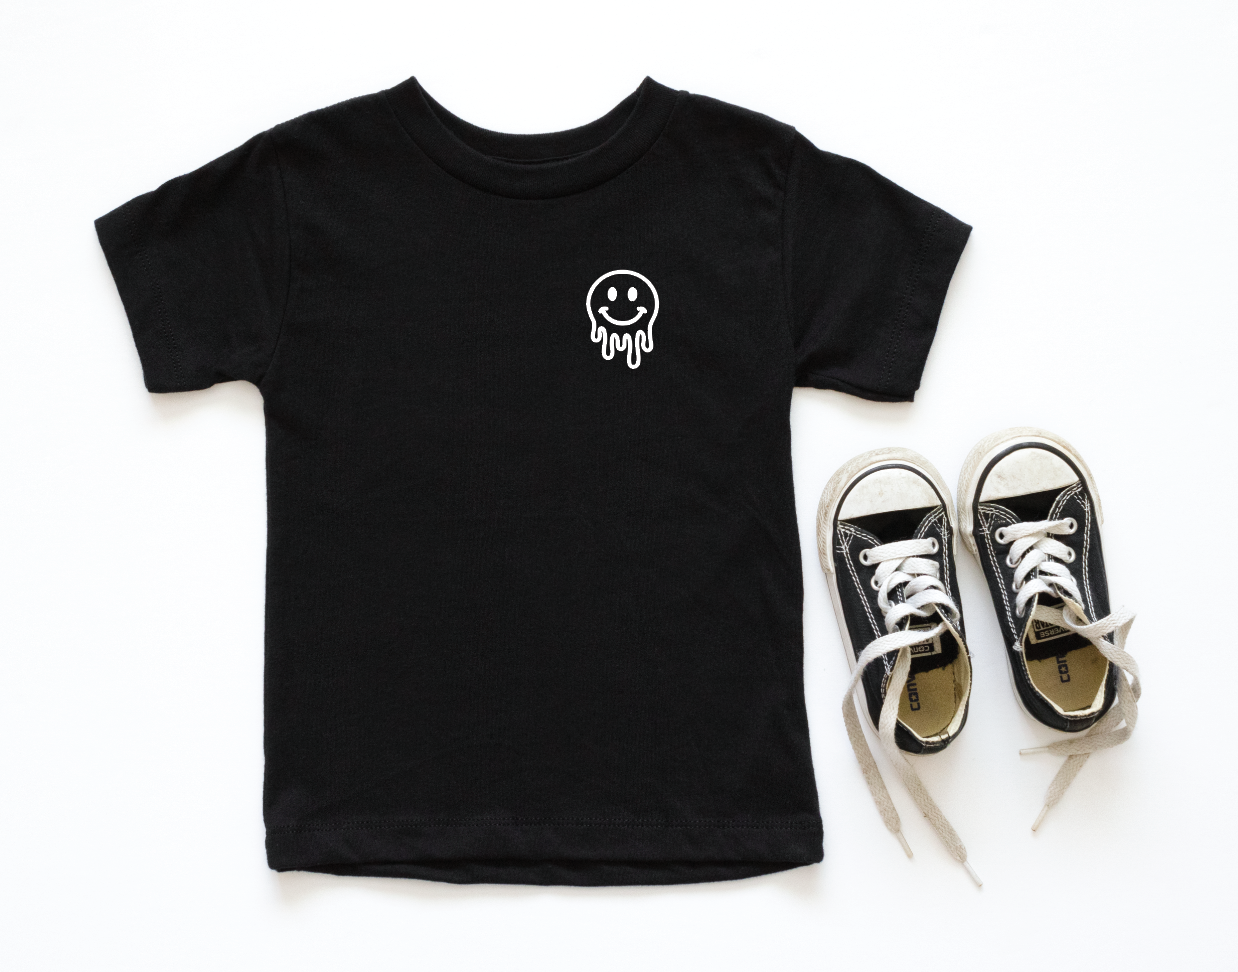 Drippy Smiley Tee